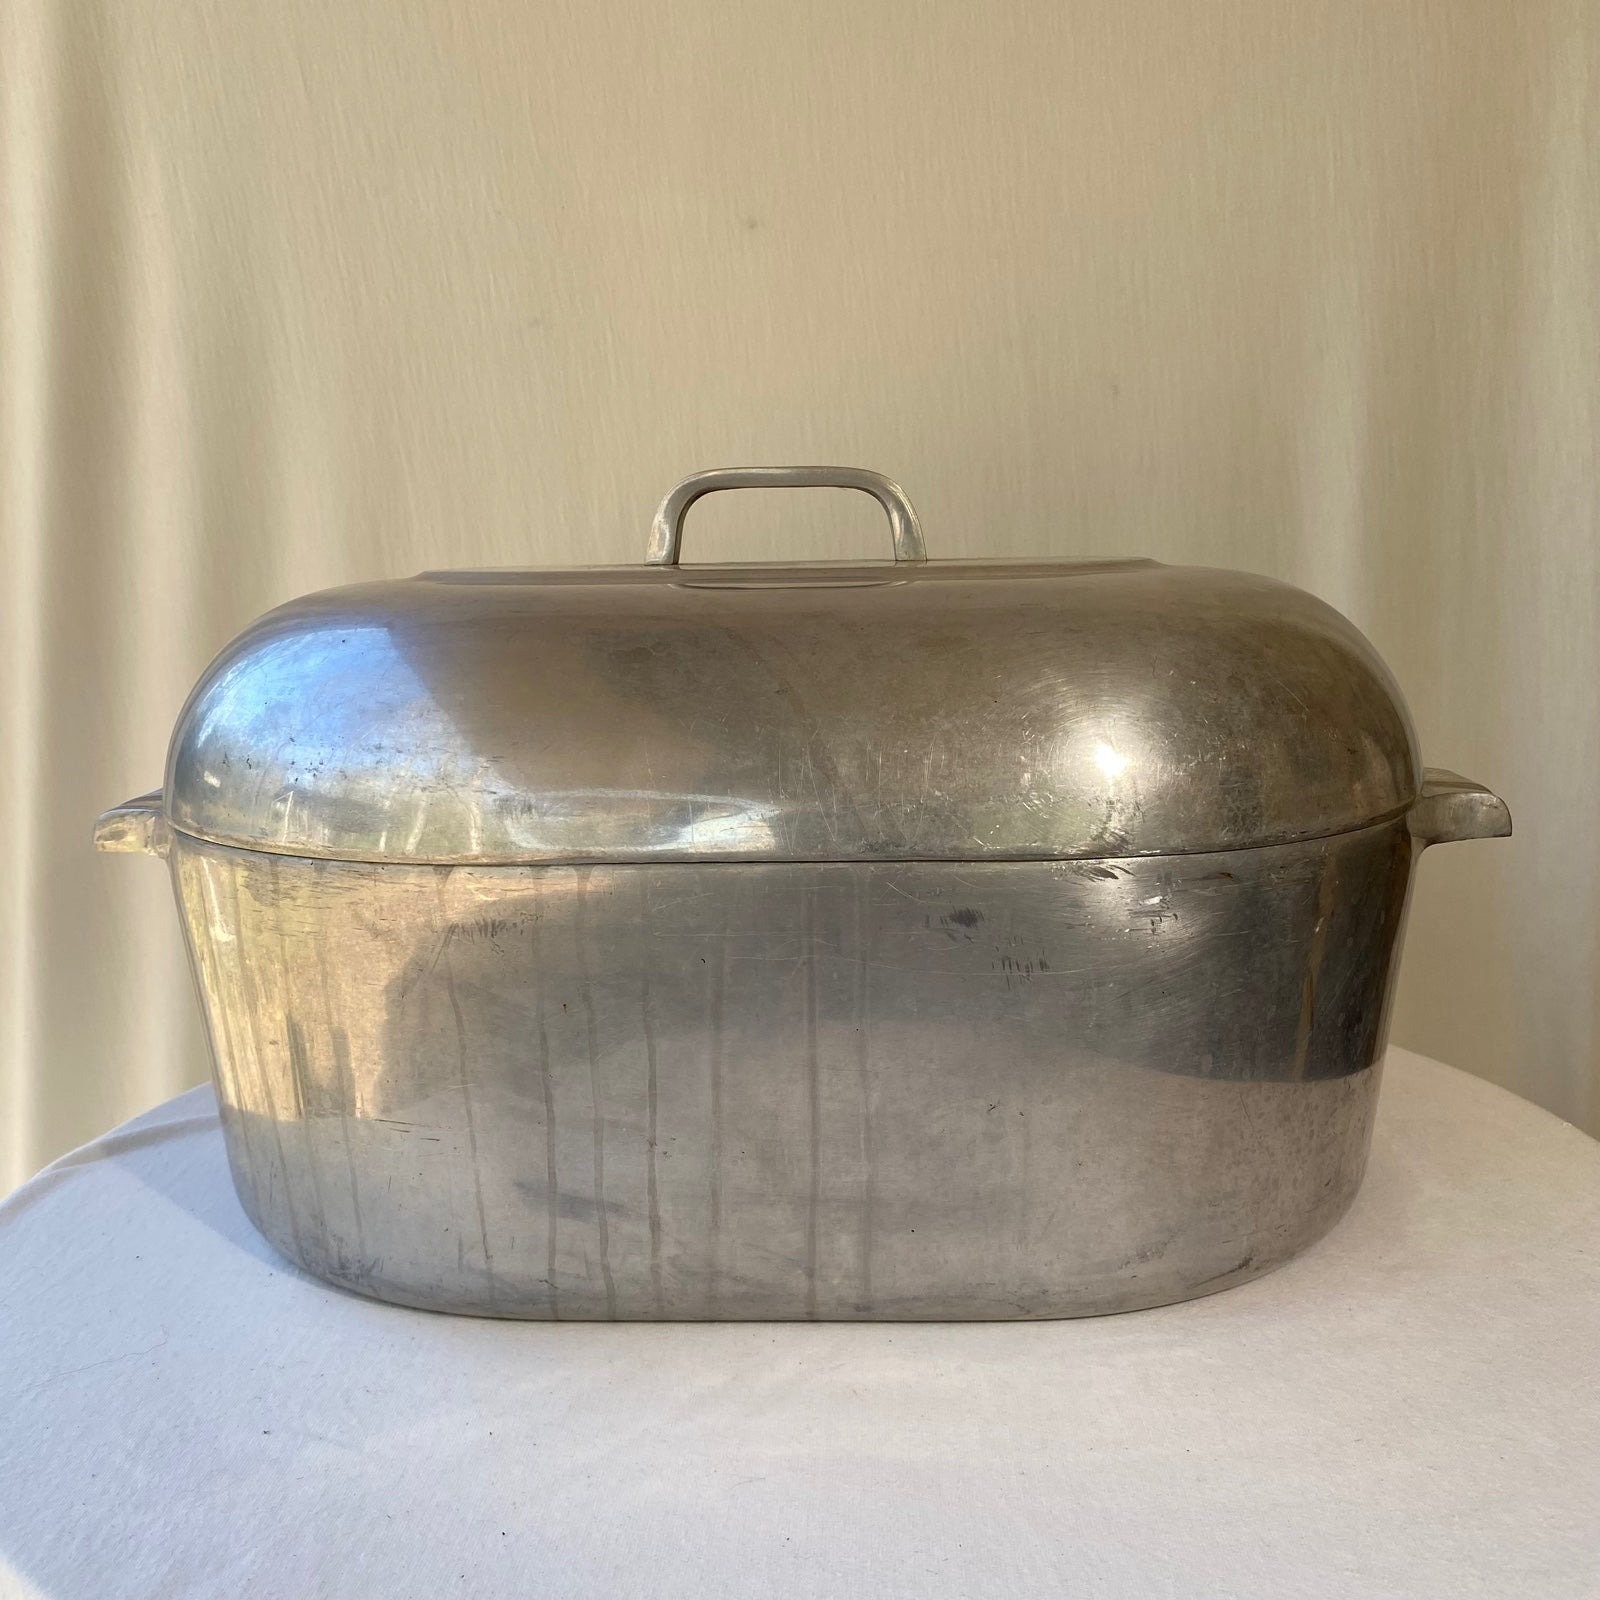 Sold at Auction: Vintage Wagner Ware Magnalite 4265-M Roaster